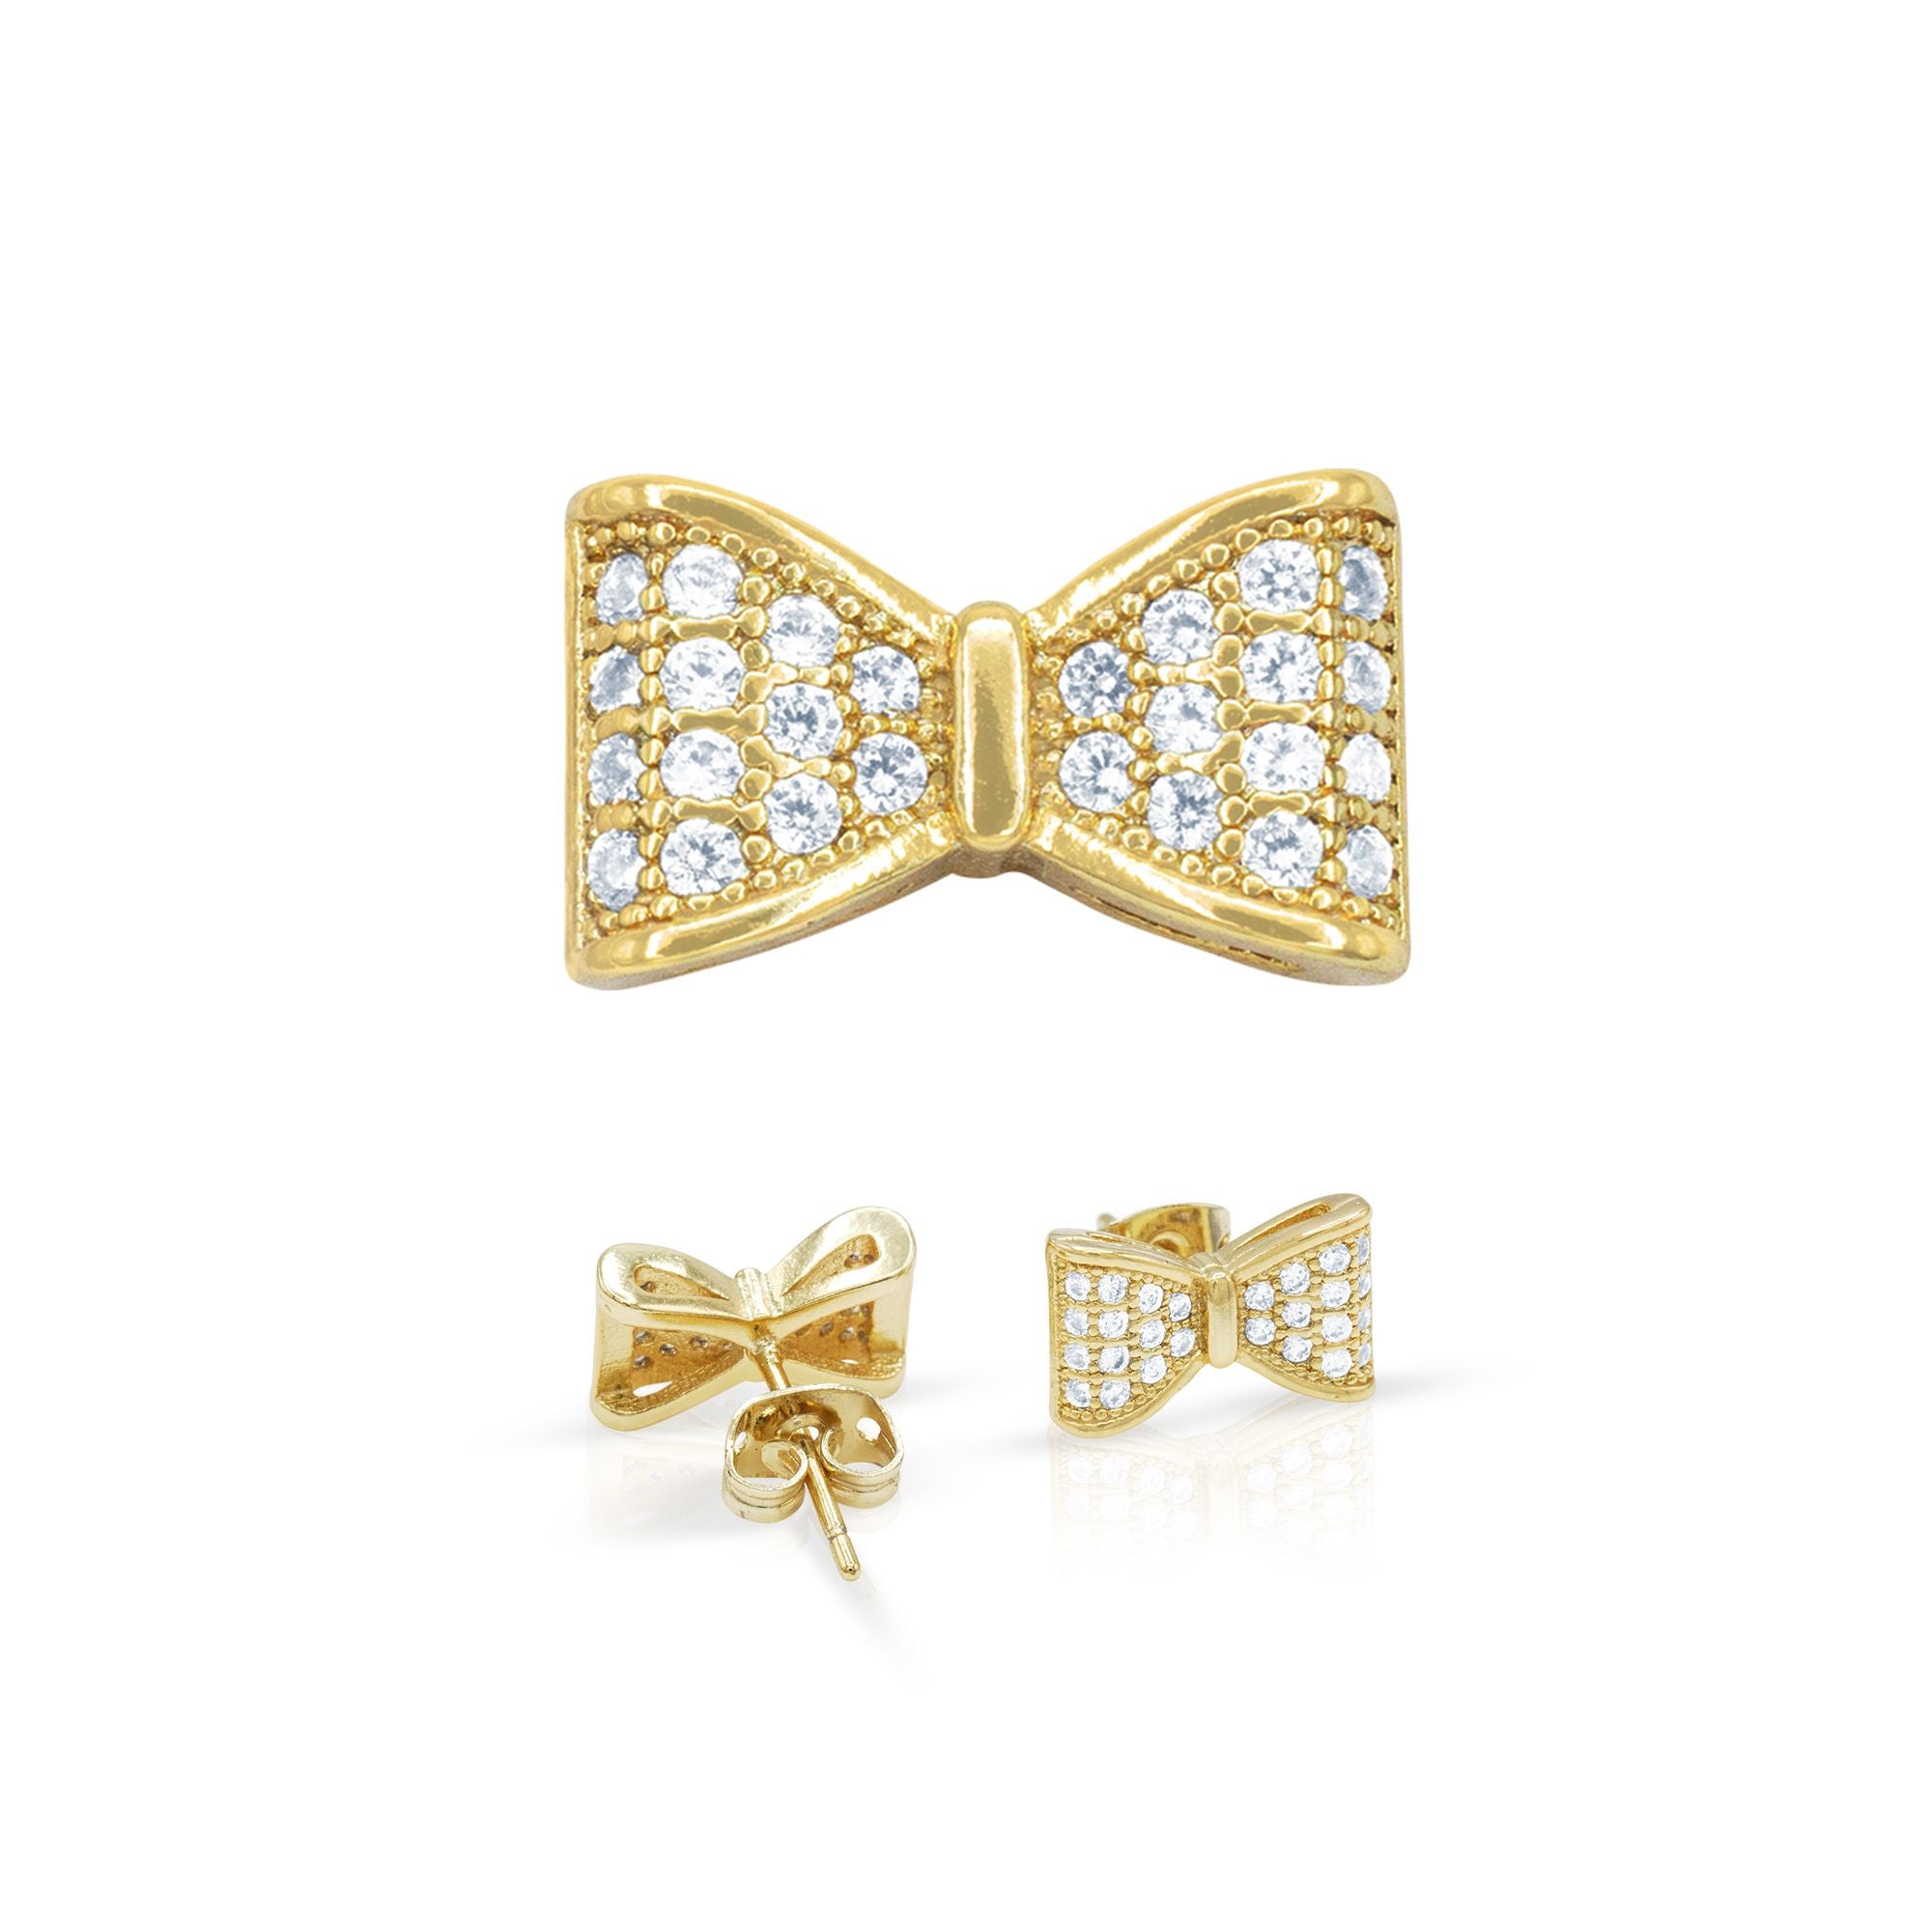 Stud earrings made of 14K gold – bows, smooth and mirror-polished surface